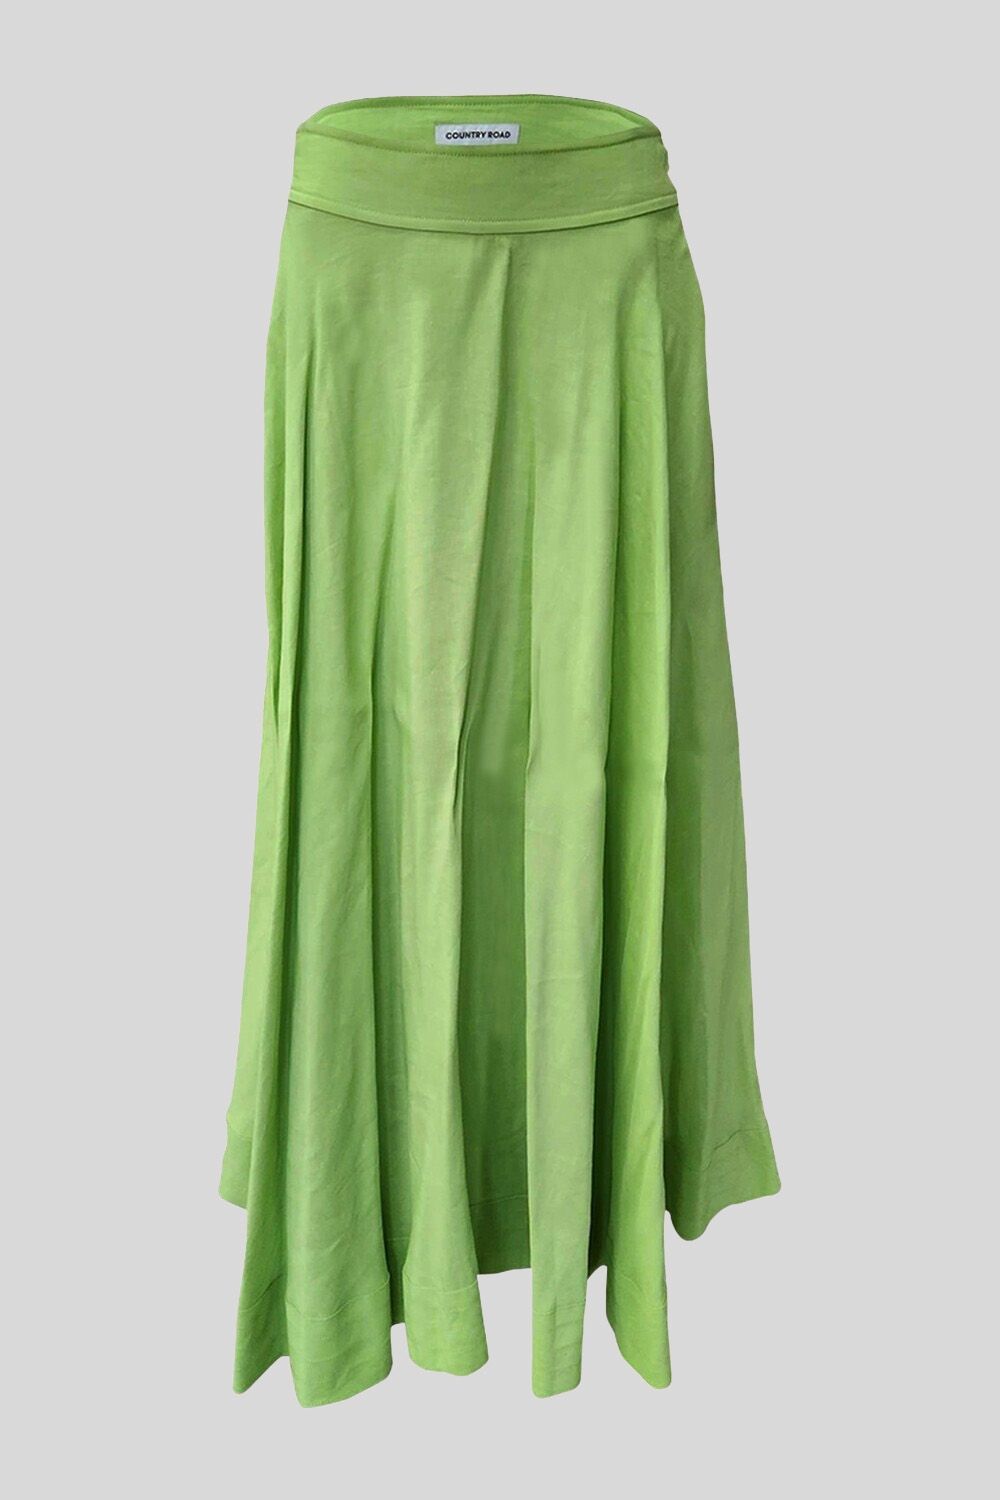 Country Road - Green Stitch Detail Maxi Skirt